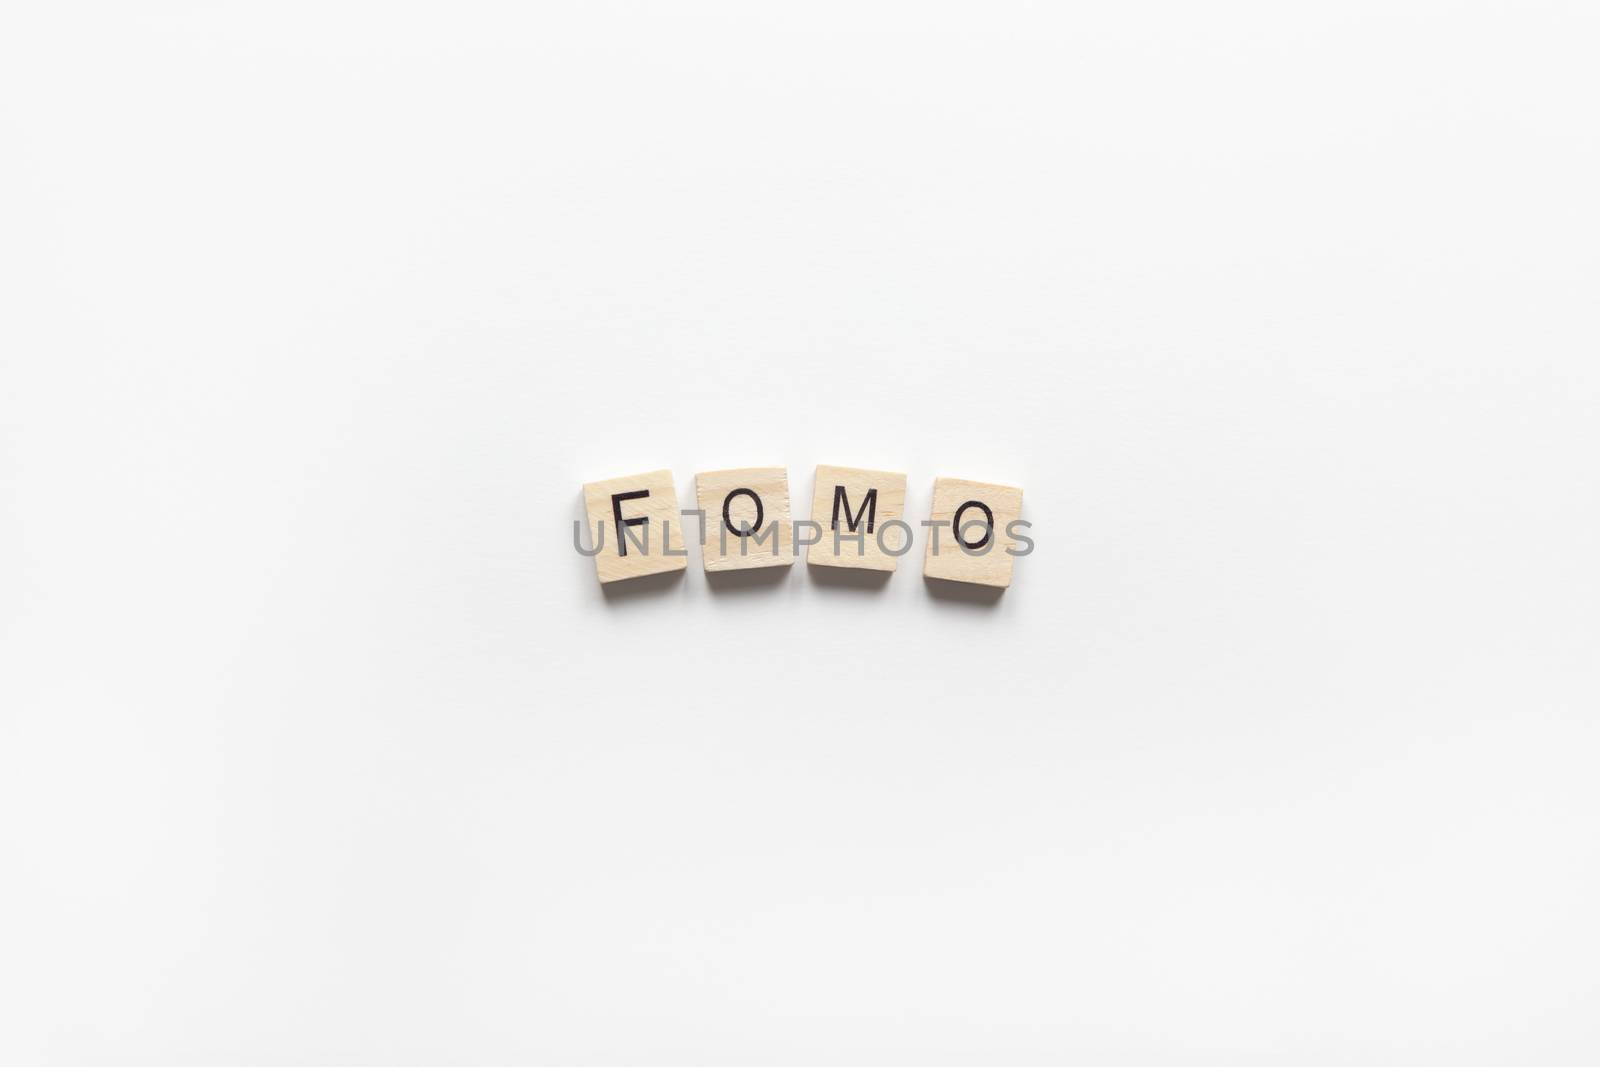 Abbreviation word FOMO from wooden blocks on white background. FOMO means Fear Of Missing Out, non-stop internet surfing. Concept social communication problem between people, digital detox. Flat lay.